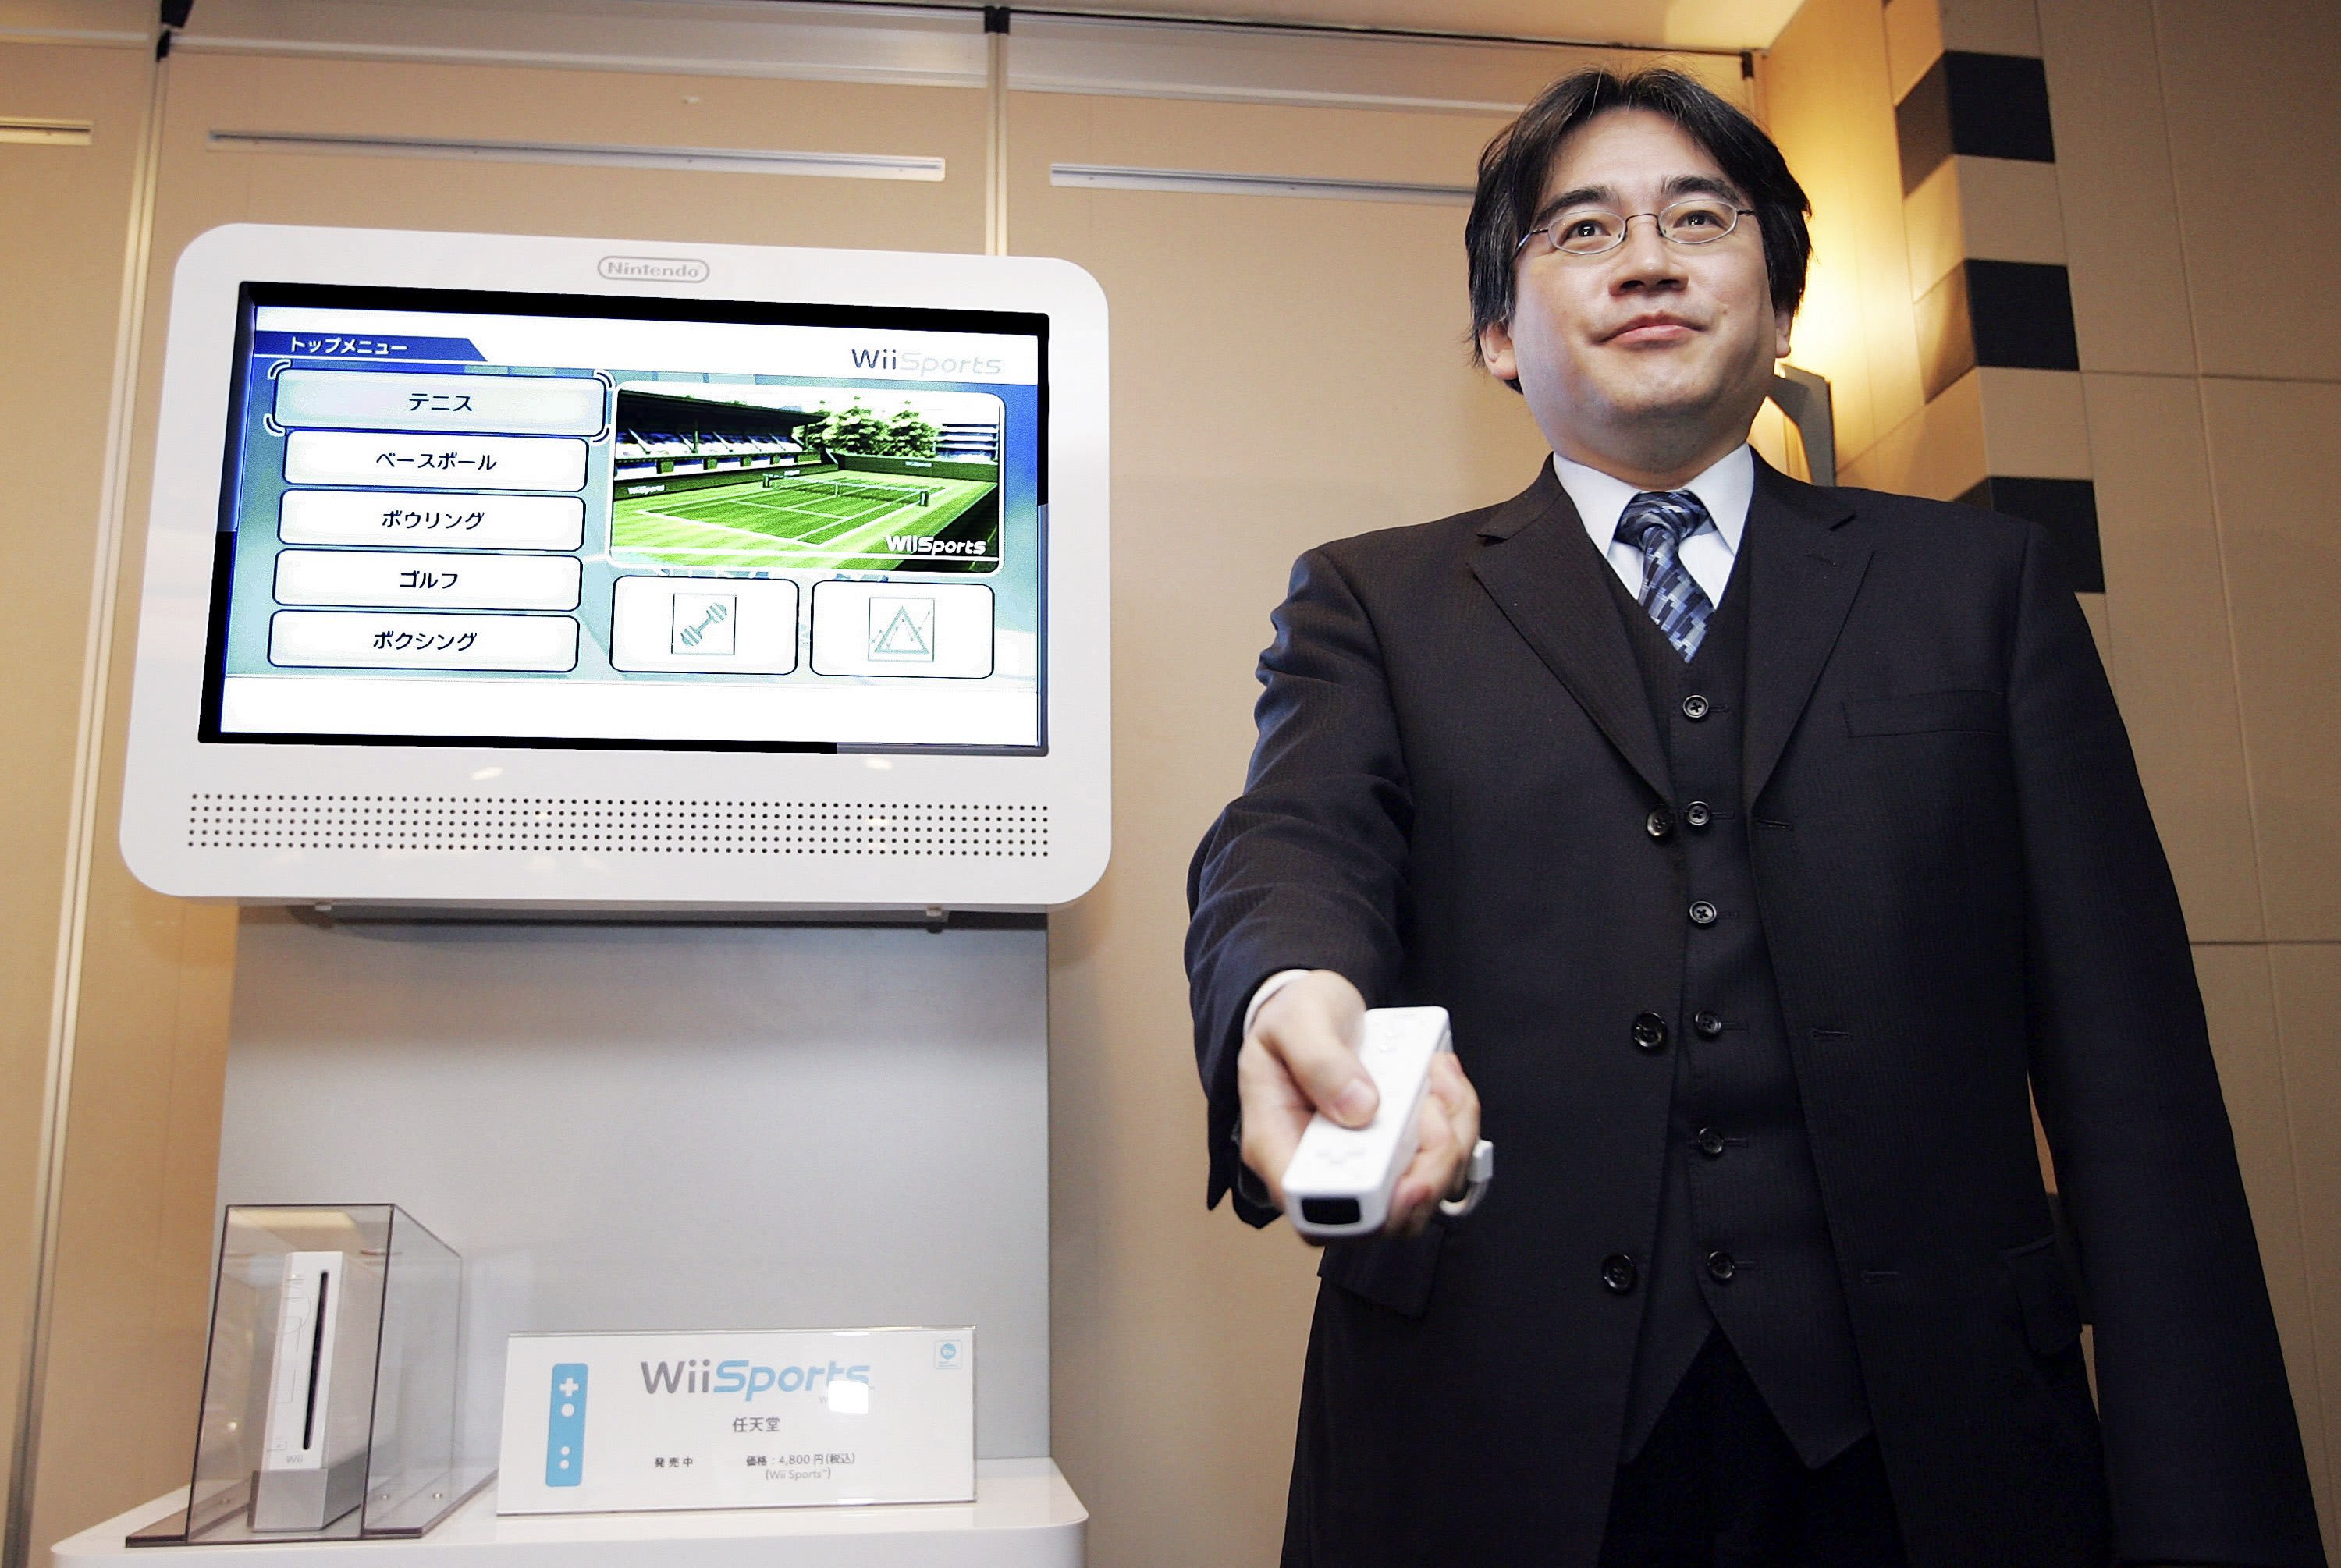 Nintendo's CEO Satoru Iwata played by his own rules